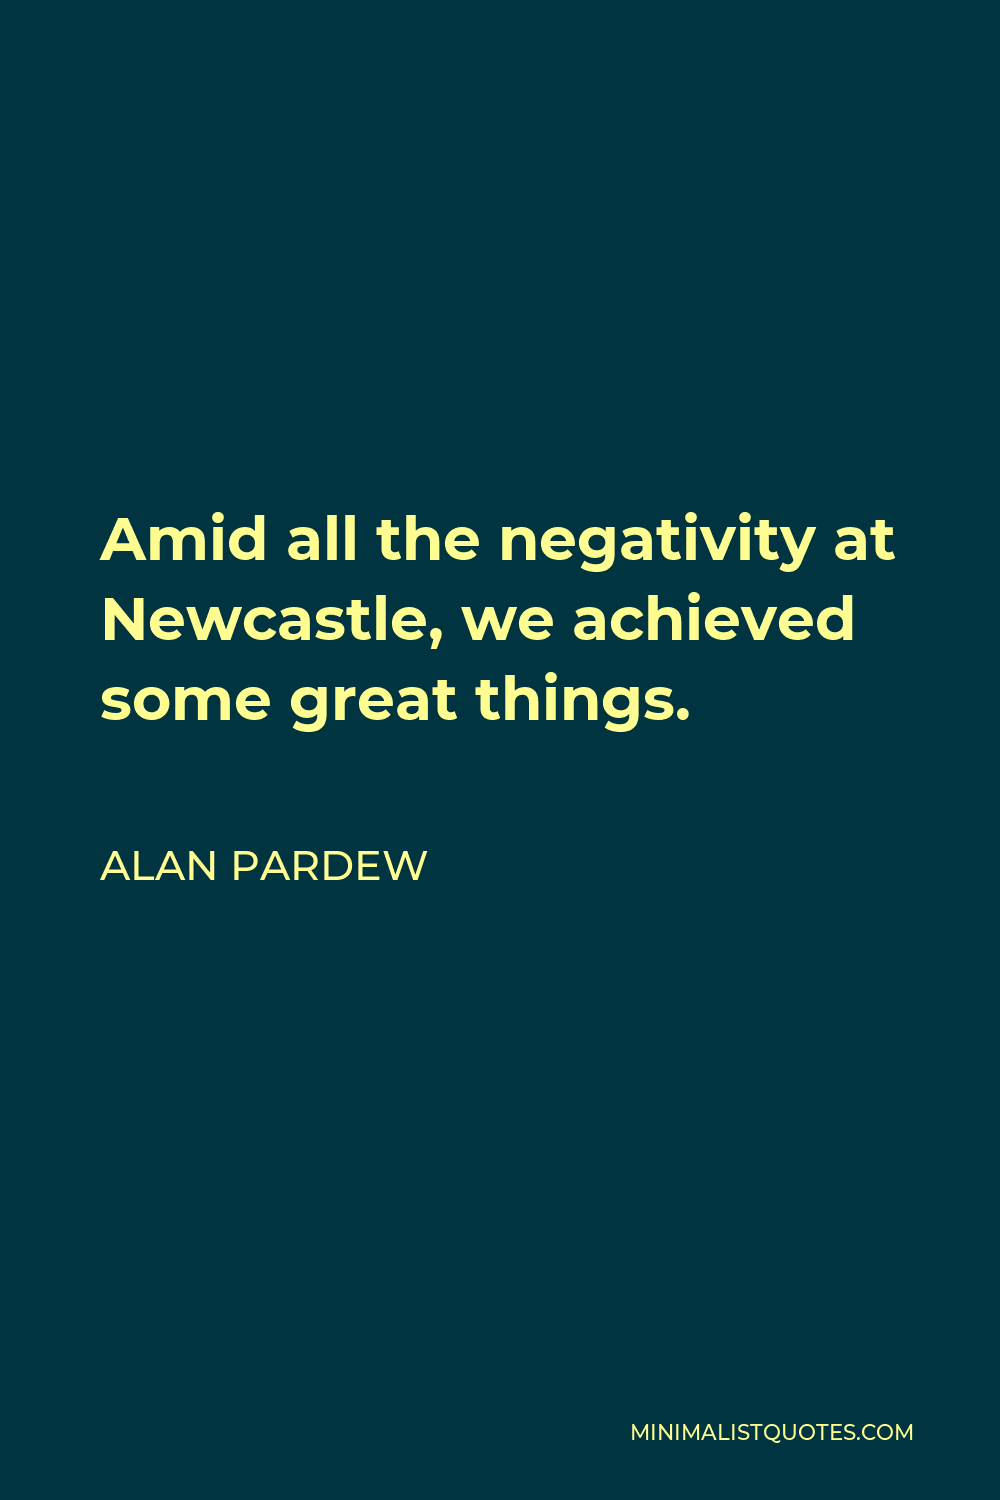 Alan Pardew Quote - Amid all the negativity at Newcastle, we achieved some great things.